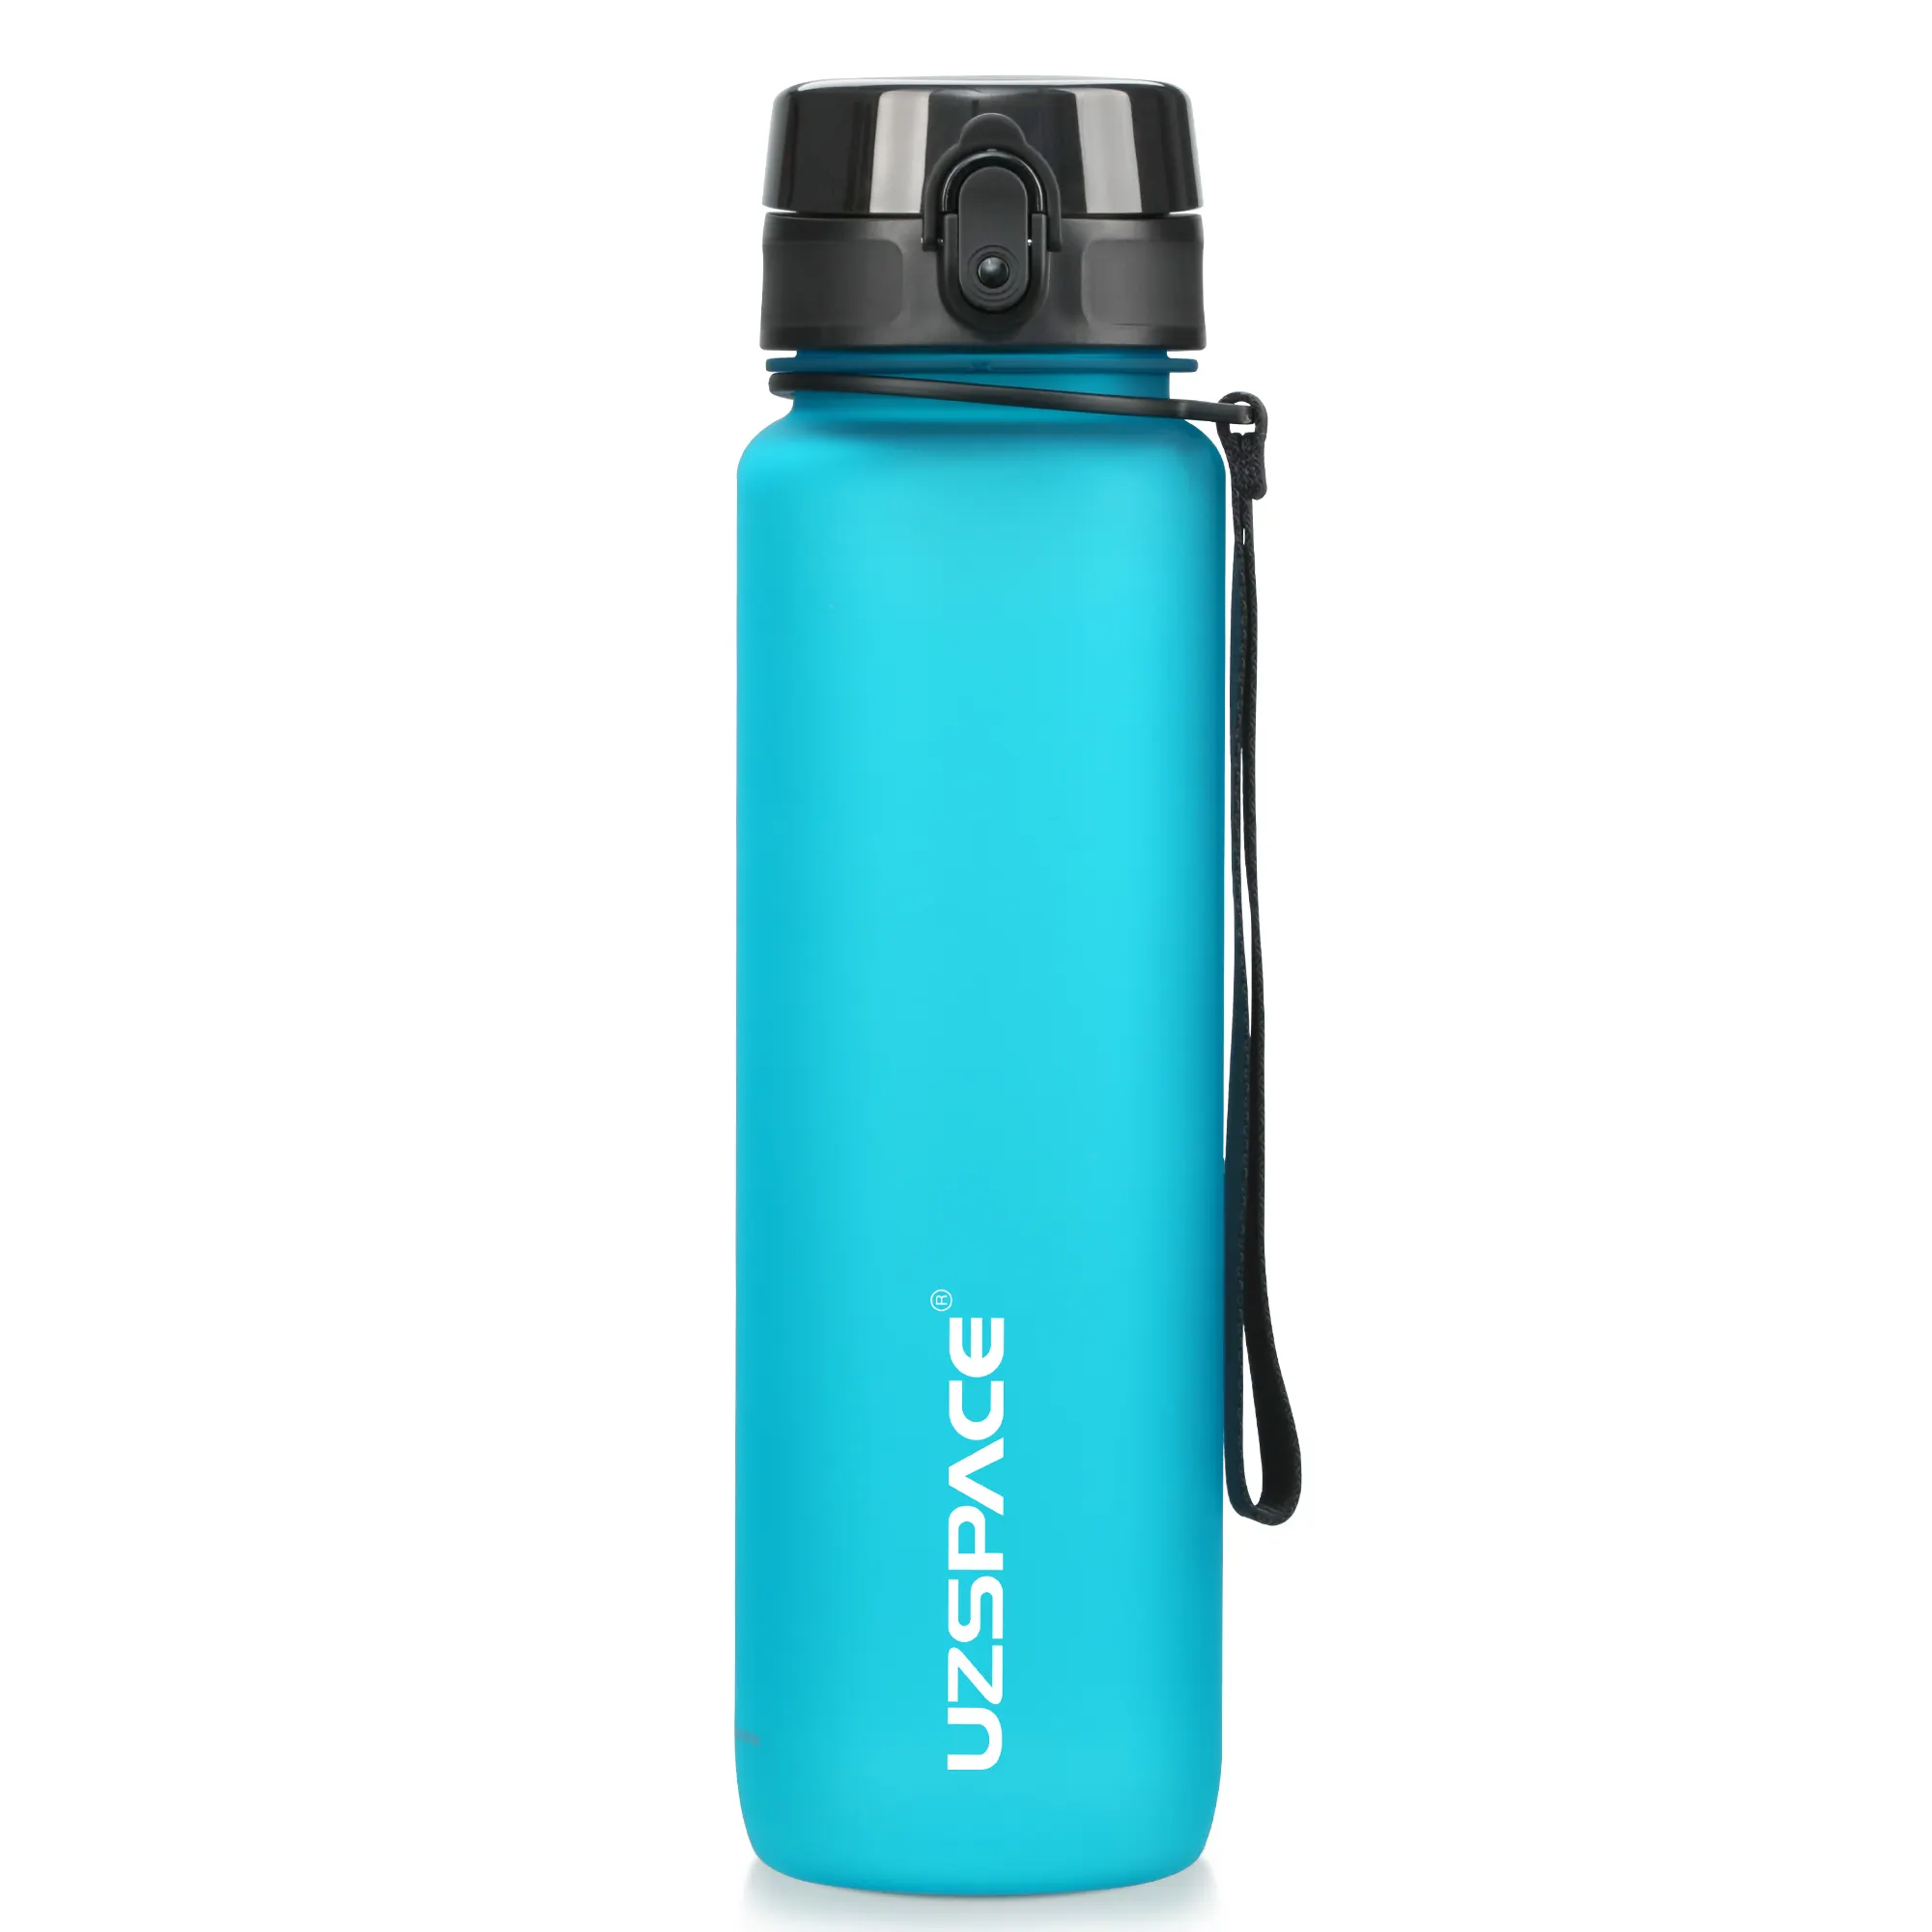 32OZ Water Bottles with Removable Straw & Time Marker, Motivational Water Bottle with BPA Free Tritan Material, Leakproof Bottle